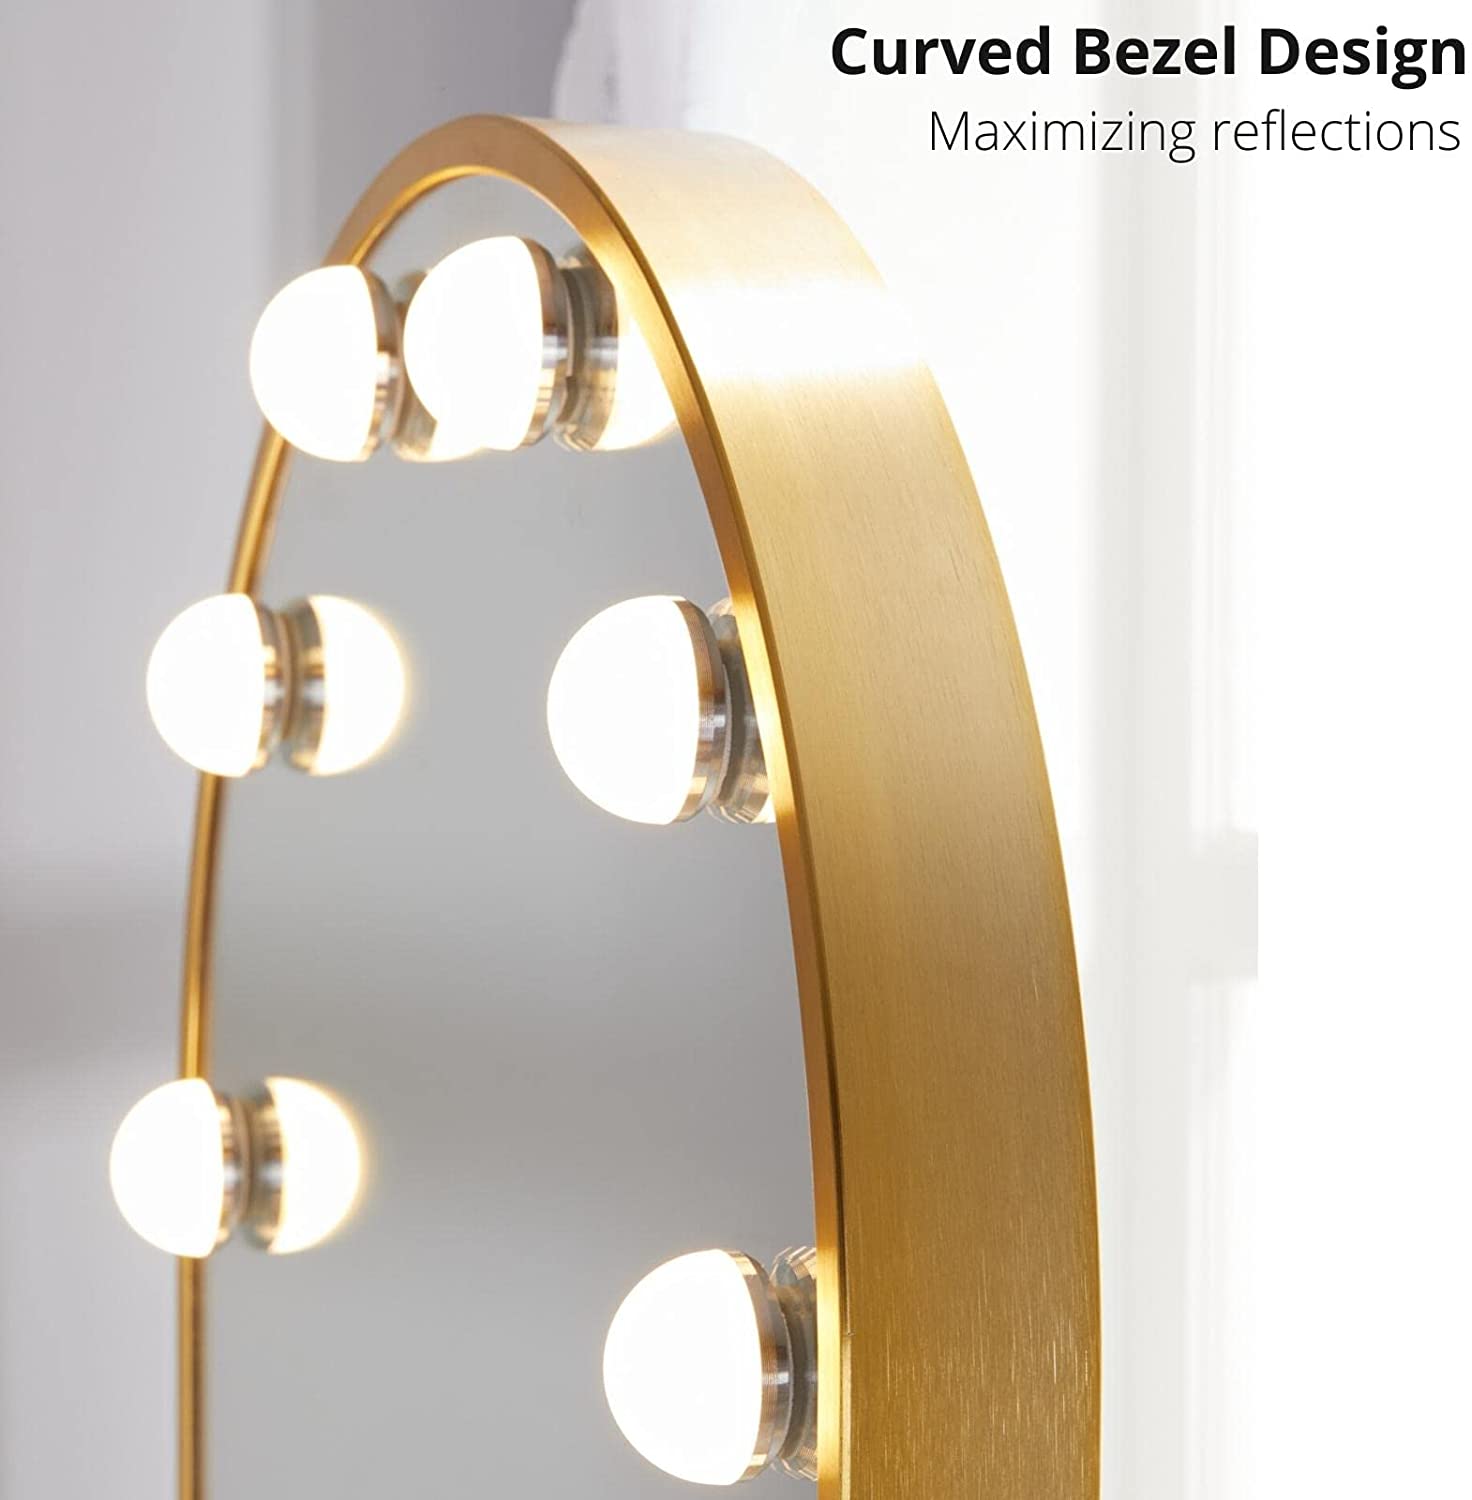 Luxfurni | Hollywood Mirror | Curved Frame Starry 12 Hollywood Vanity Mirror with LED Light - Gold